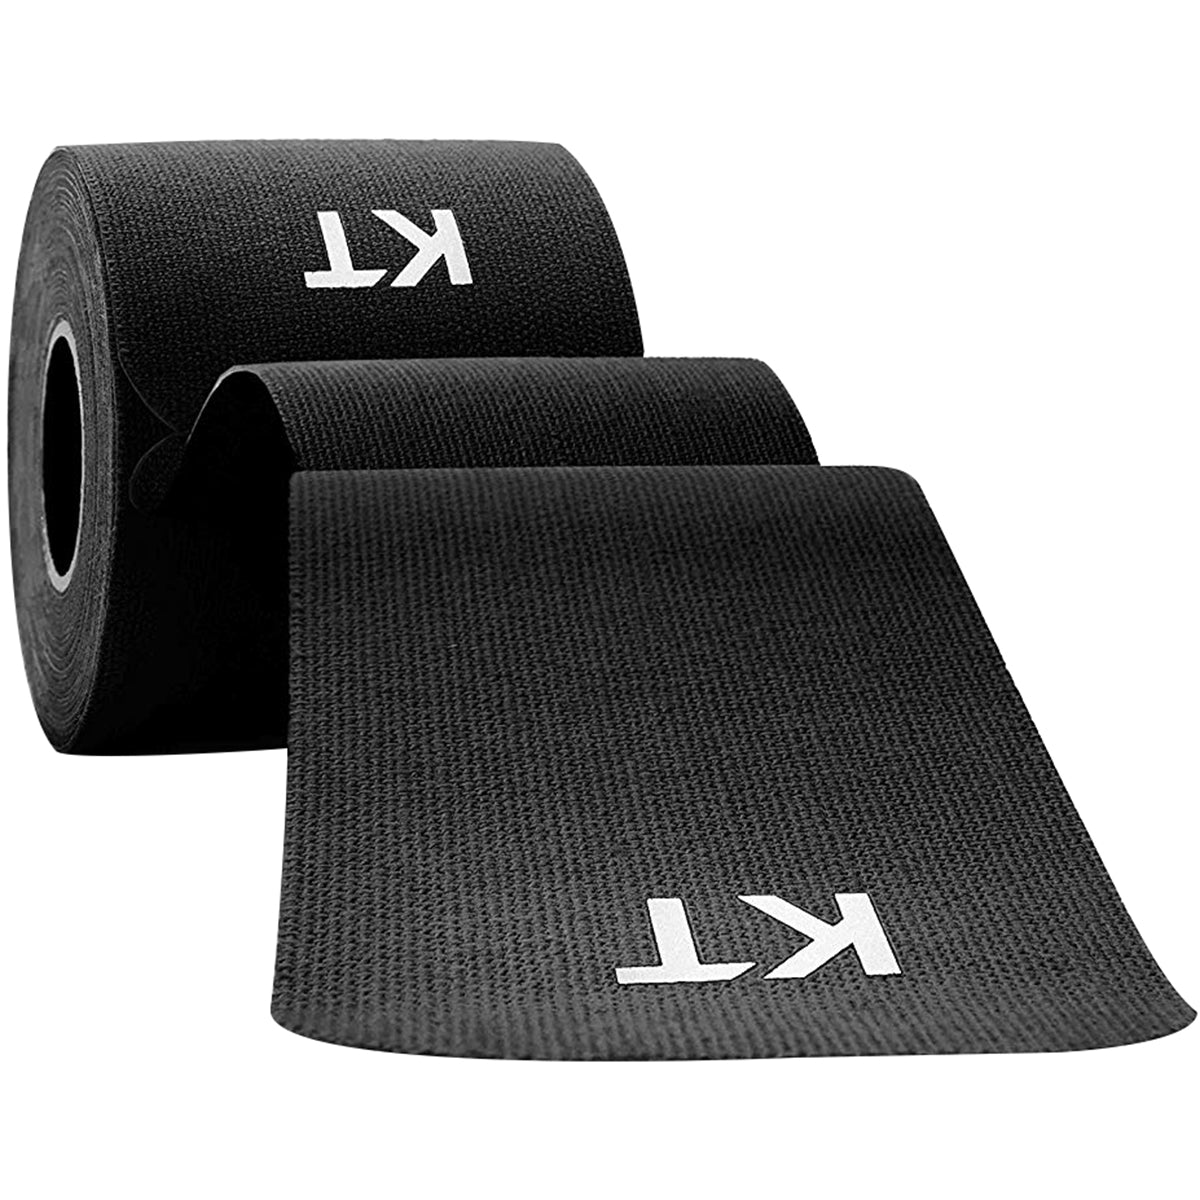 KT Tape Cotton 10" Precut Kinesiology Therapeutic Sports Roll, 20 Strips, Black KT Tape